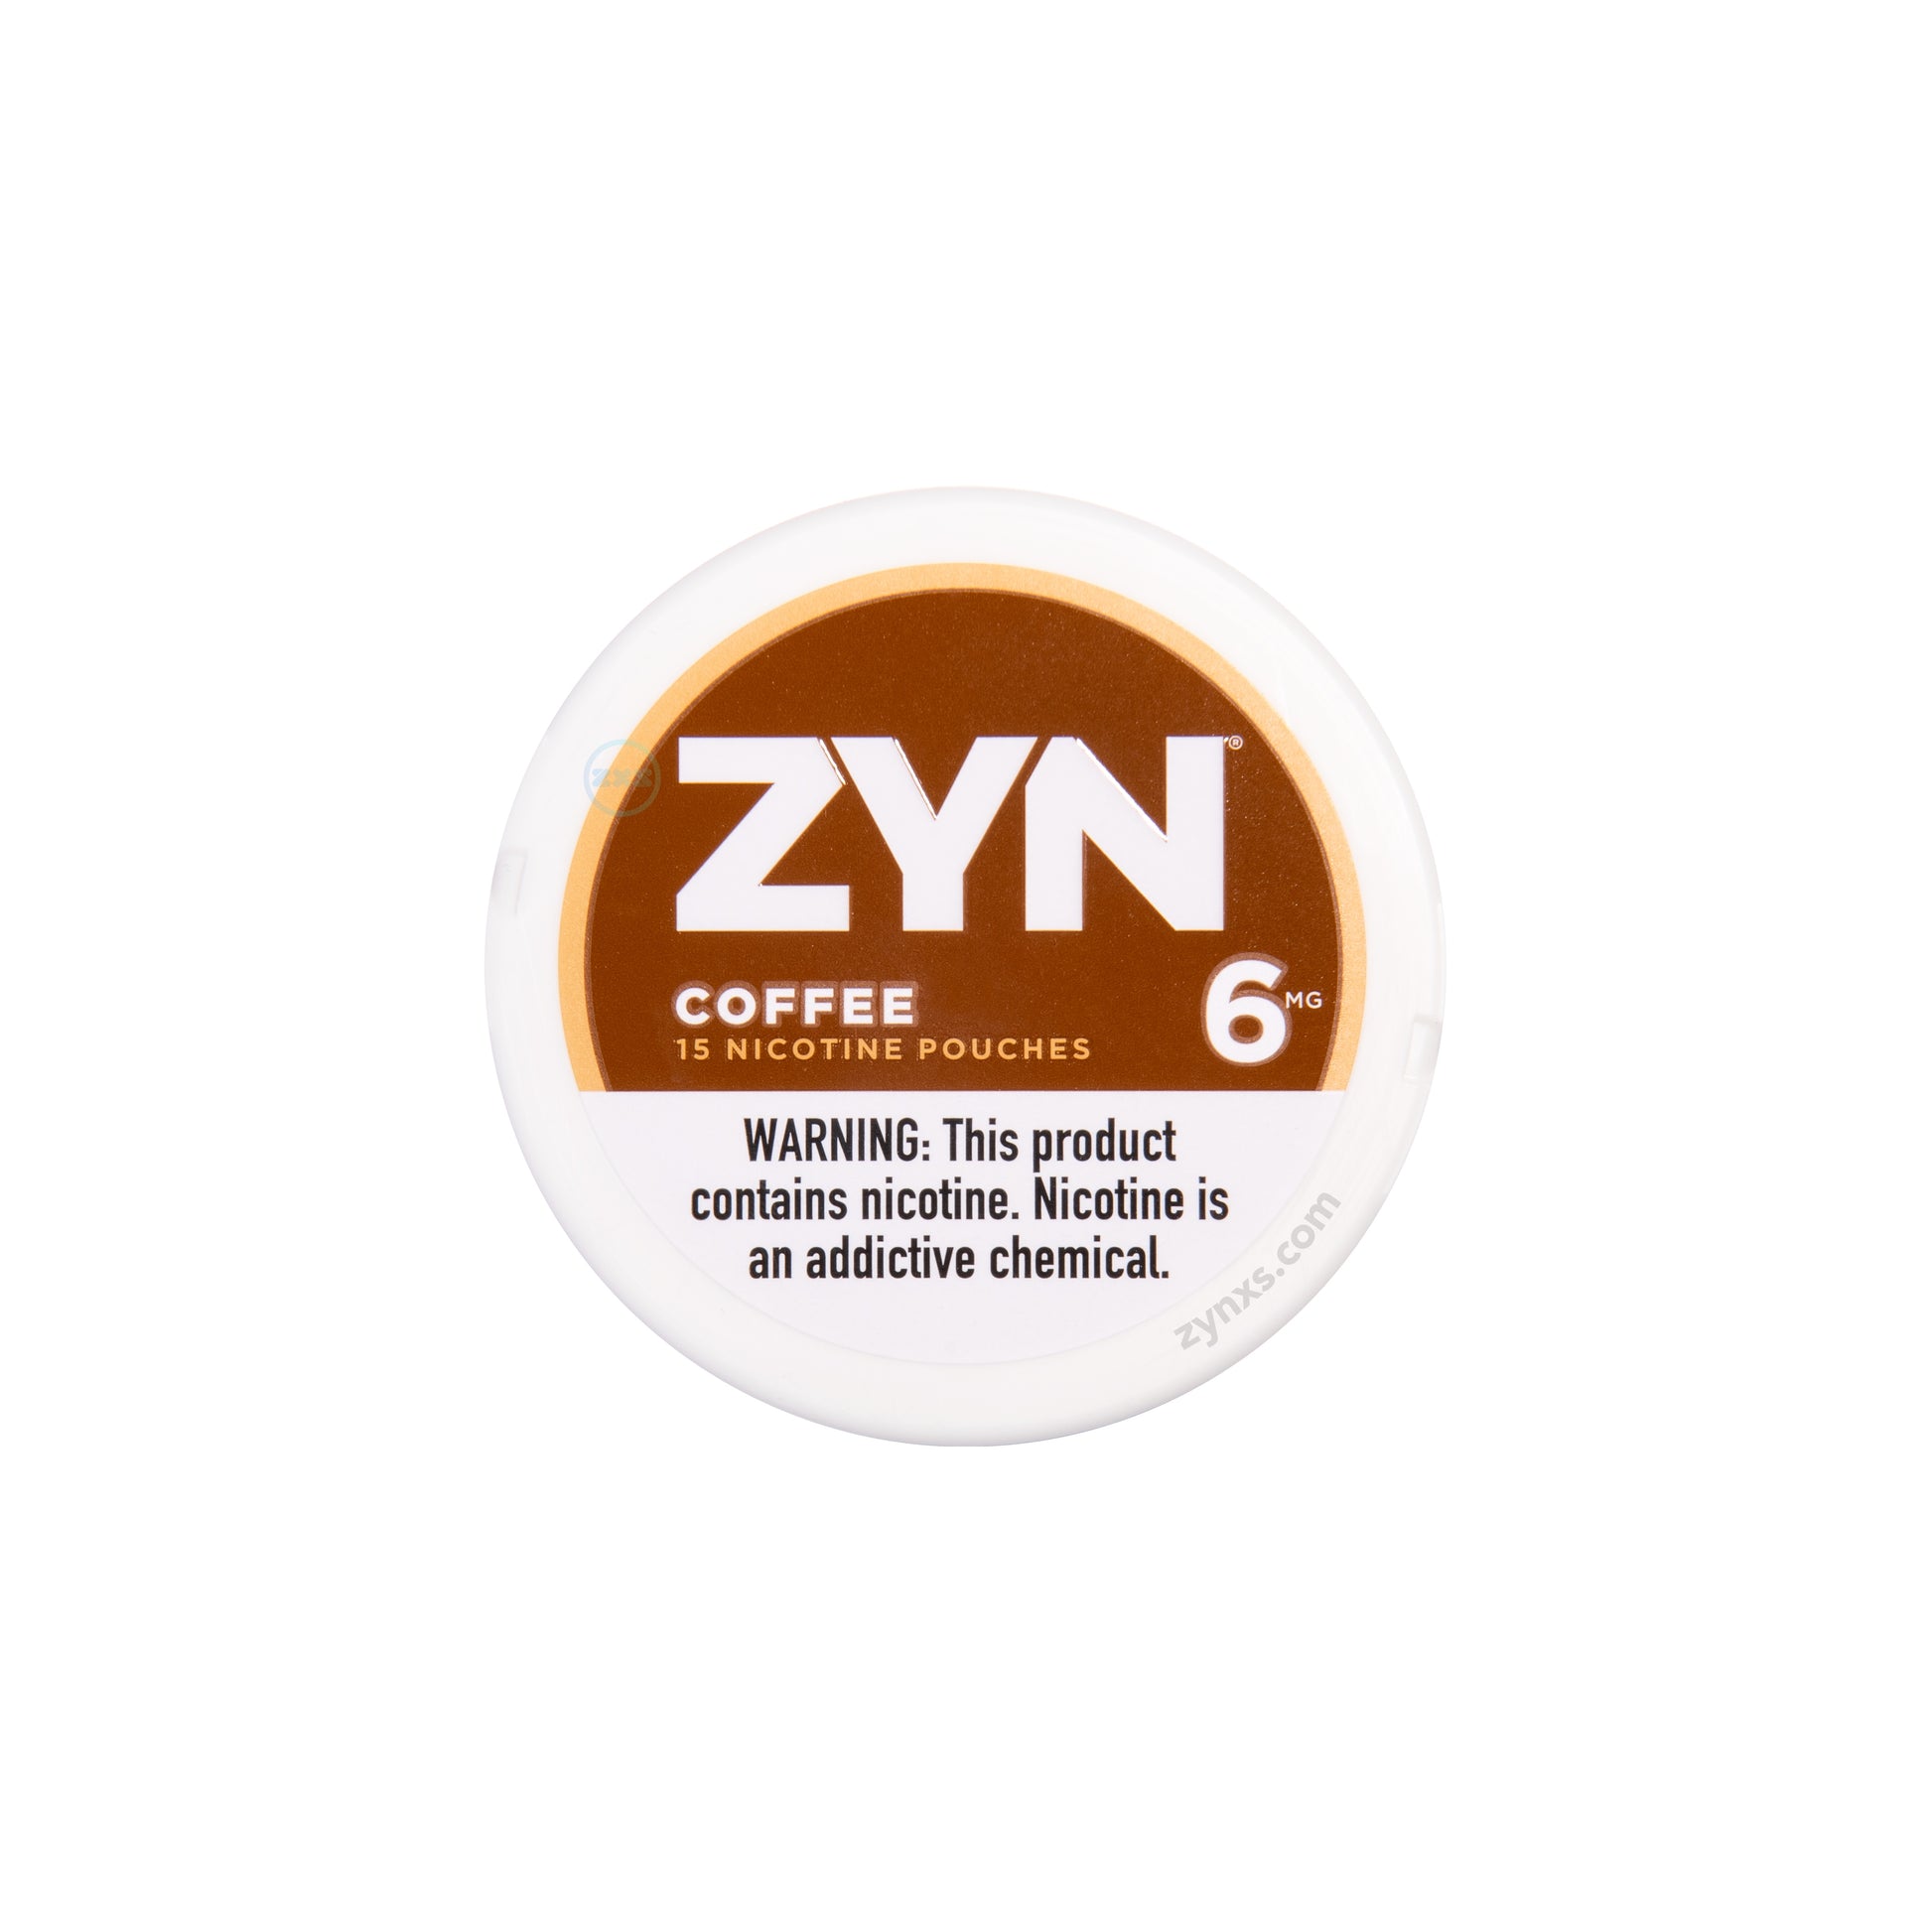 Zyn Coffee 6 MG nicotine pouches packaging. The package has a rich brown and black color theme, reflecting the coffee flavor.